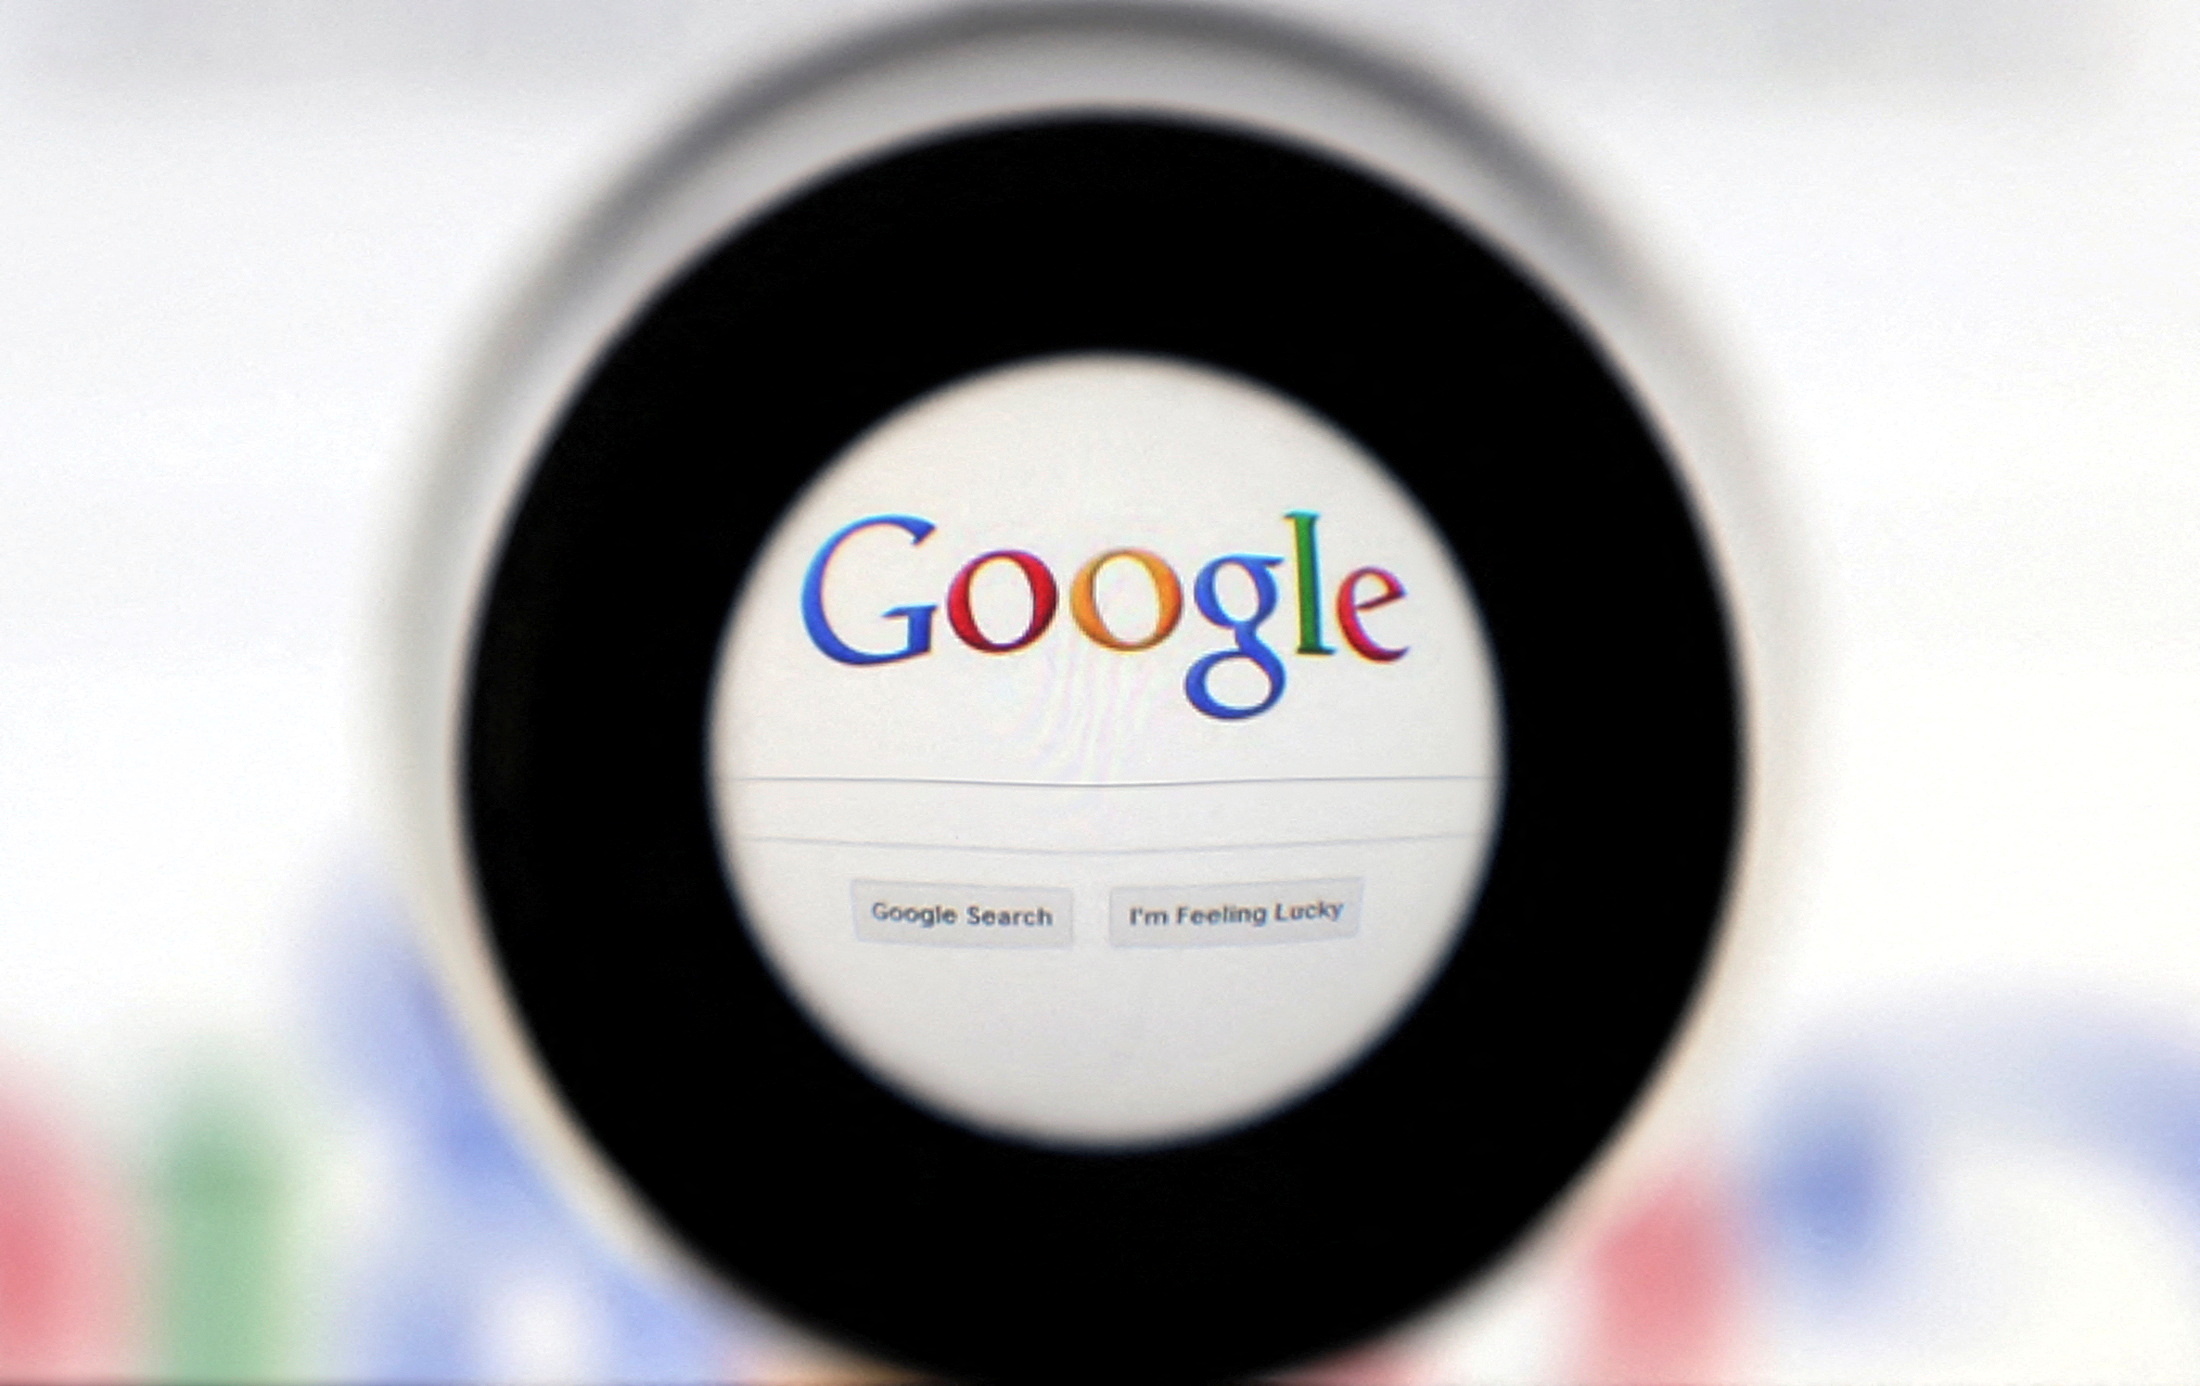 FILE PHOTO: A Google search page is seen through a magnifying glass in this photo illustration taken May 30, 2014.    REUTERS/Francois Lenoir/File Photo